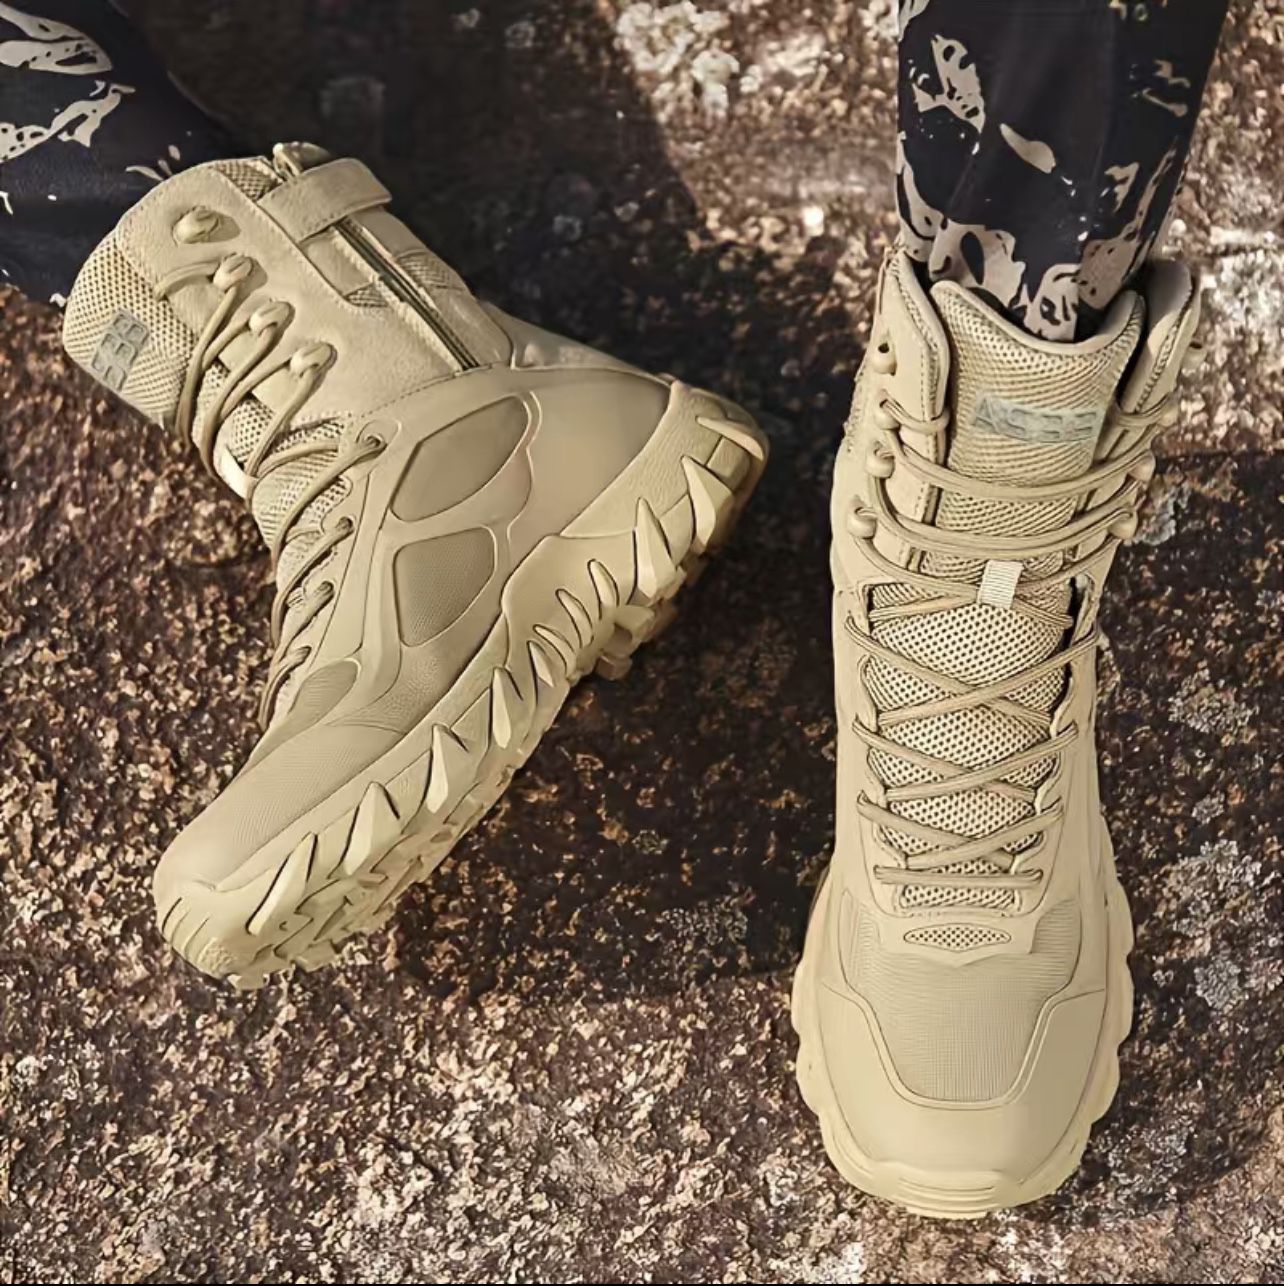 Tactical/work/hiking Boots